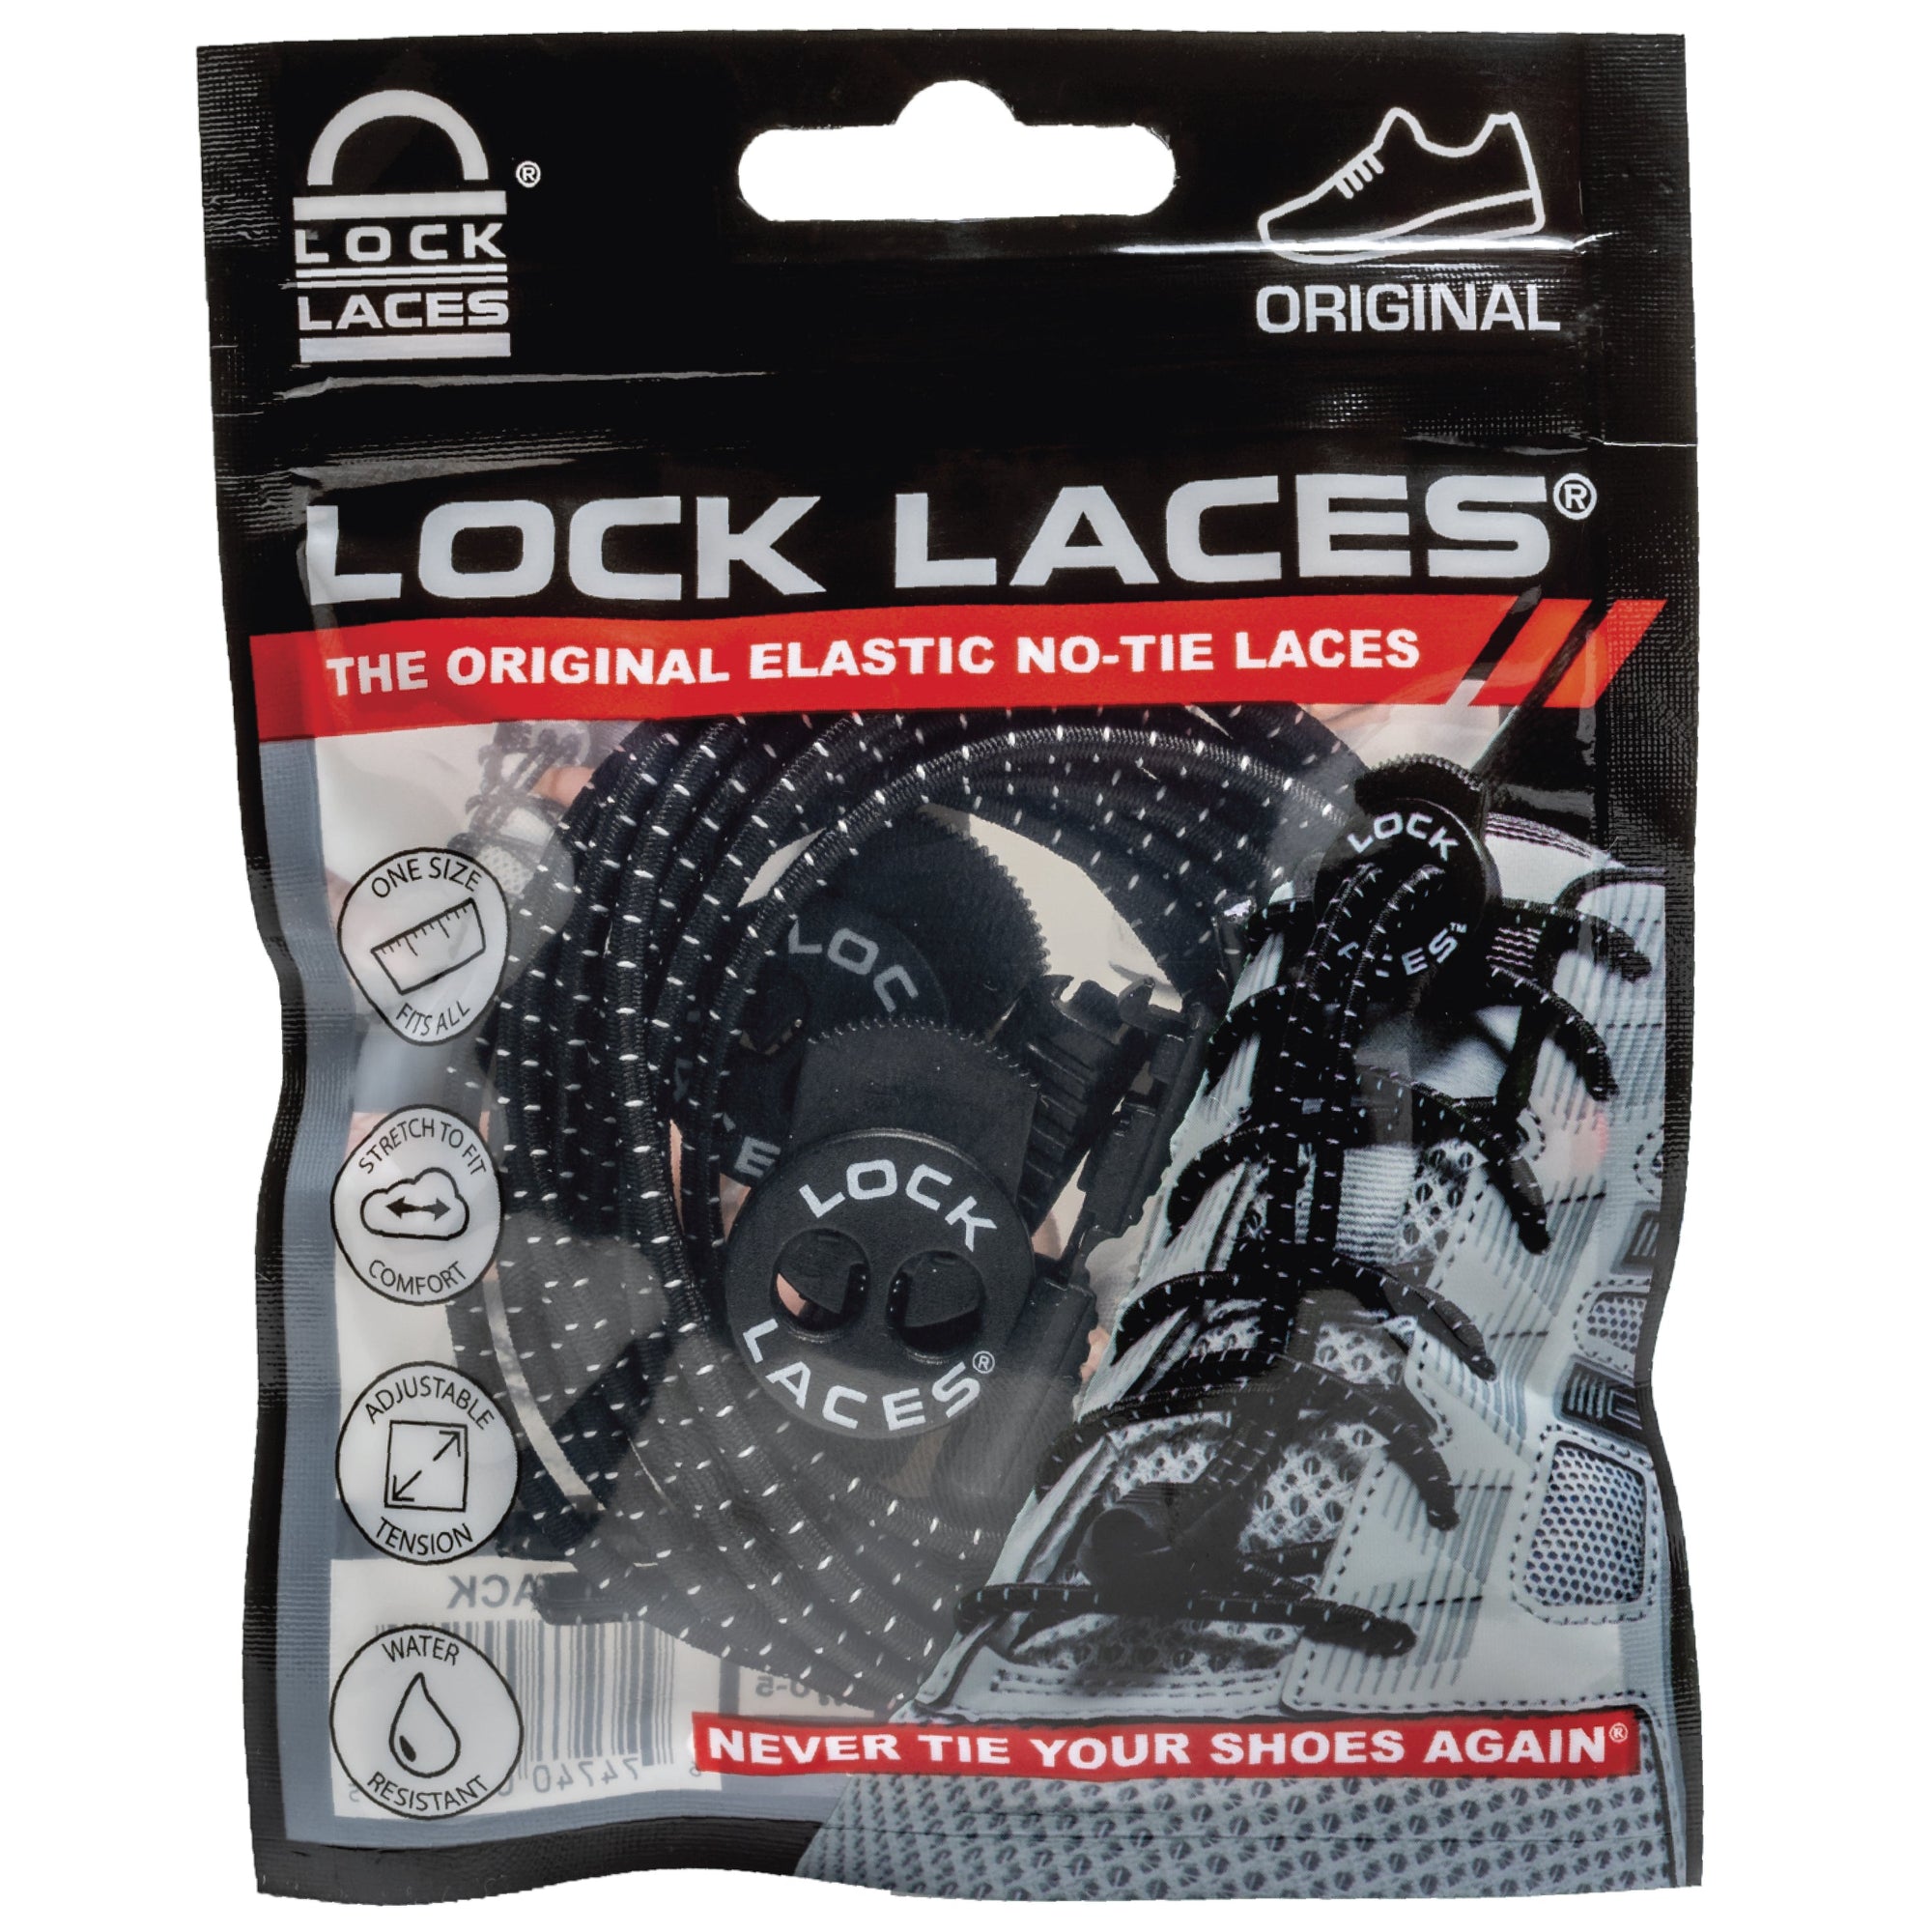 Free Lock Laces From Your Friend!